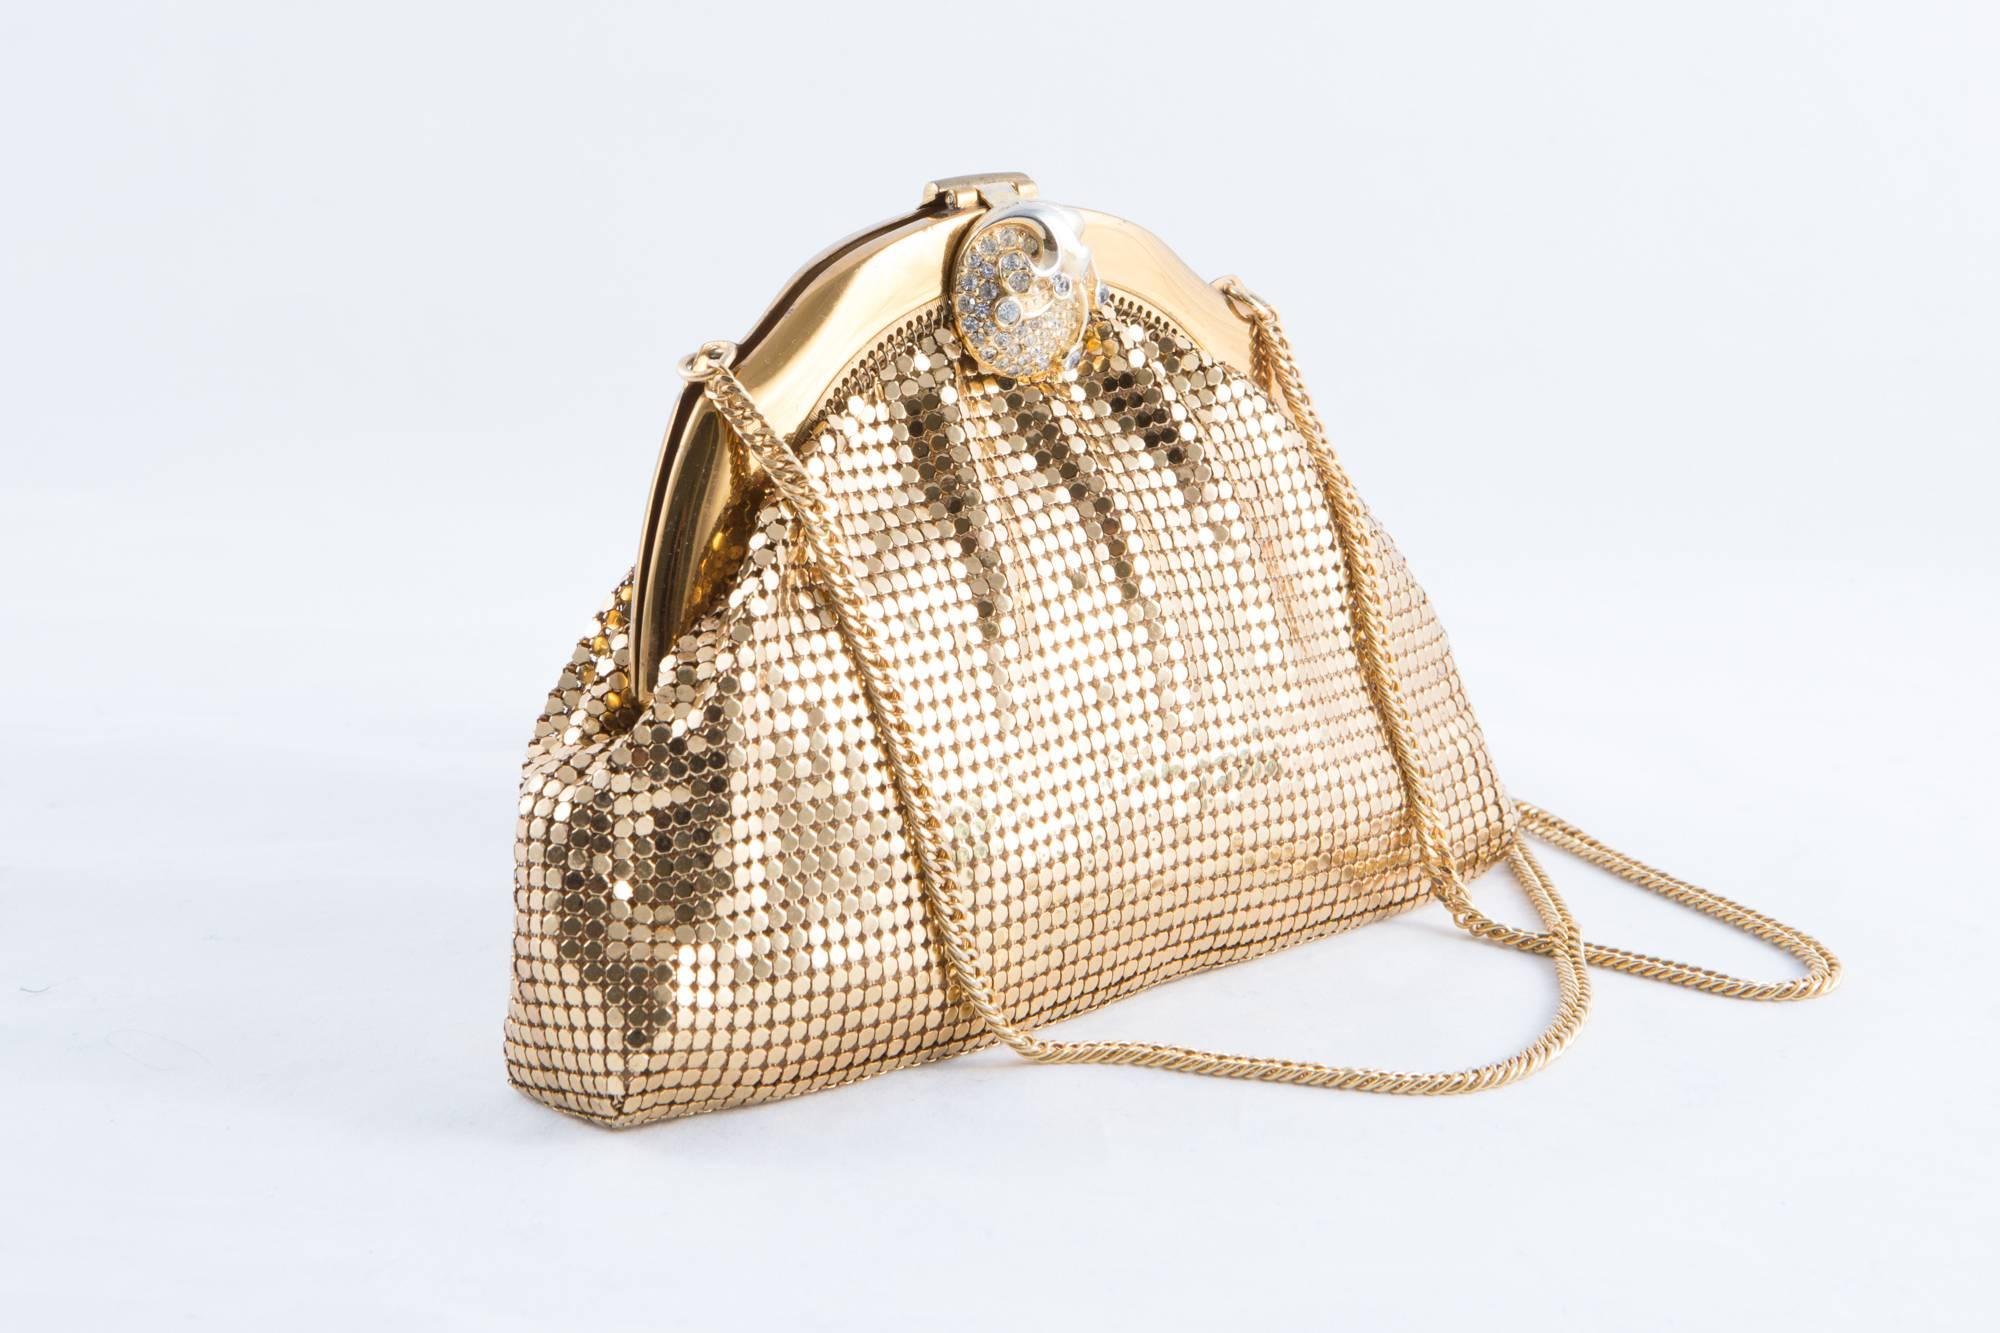 Gold mesh Whiting & Davis evening clutch featuring a gold and strass top clasp closure, an inside peach color silk lining and gold chain handle. (Length:32,2 in. (82cm)).
Bottom bag 7in. (18cm) X Heigth: 5,1in. (13cm) 
In excellent vintage